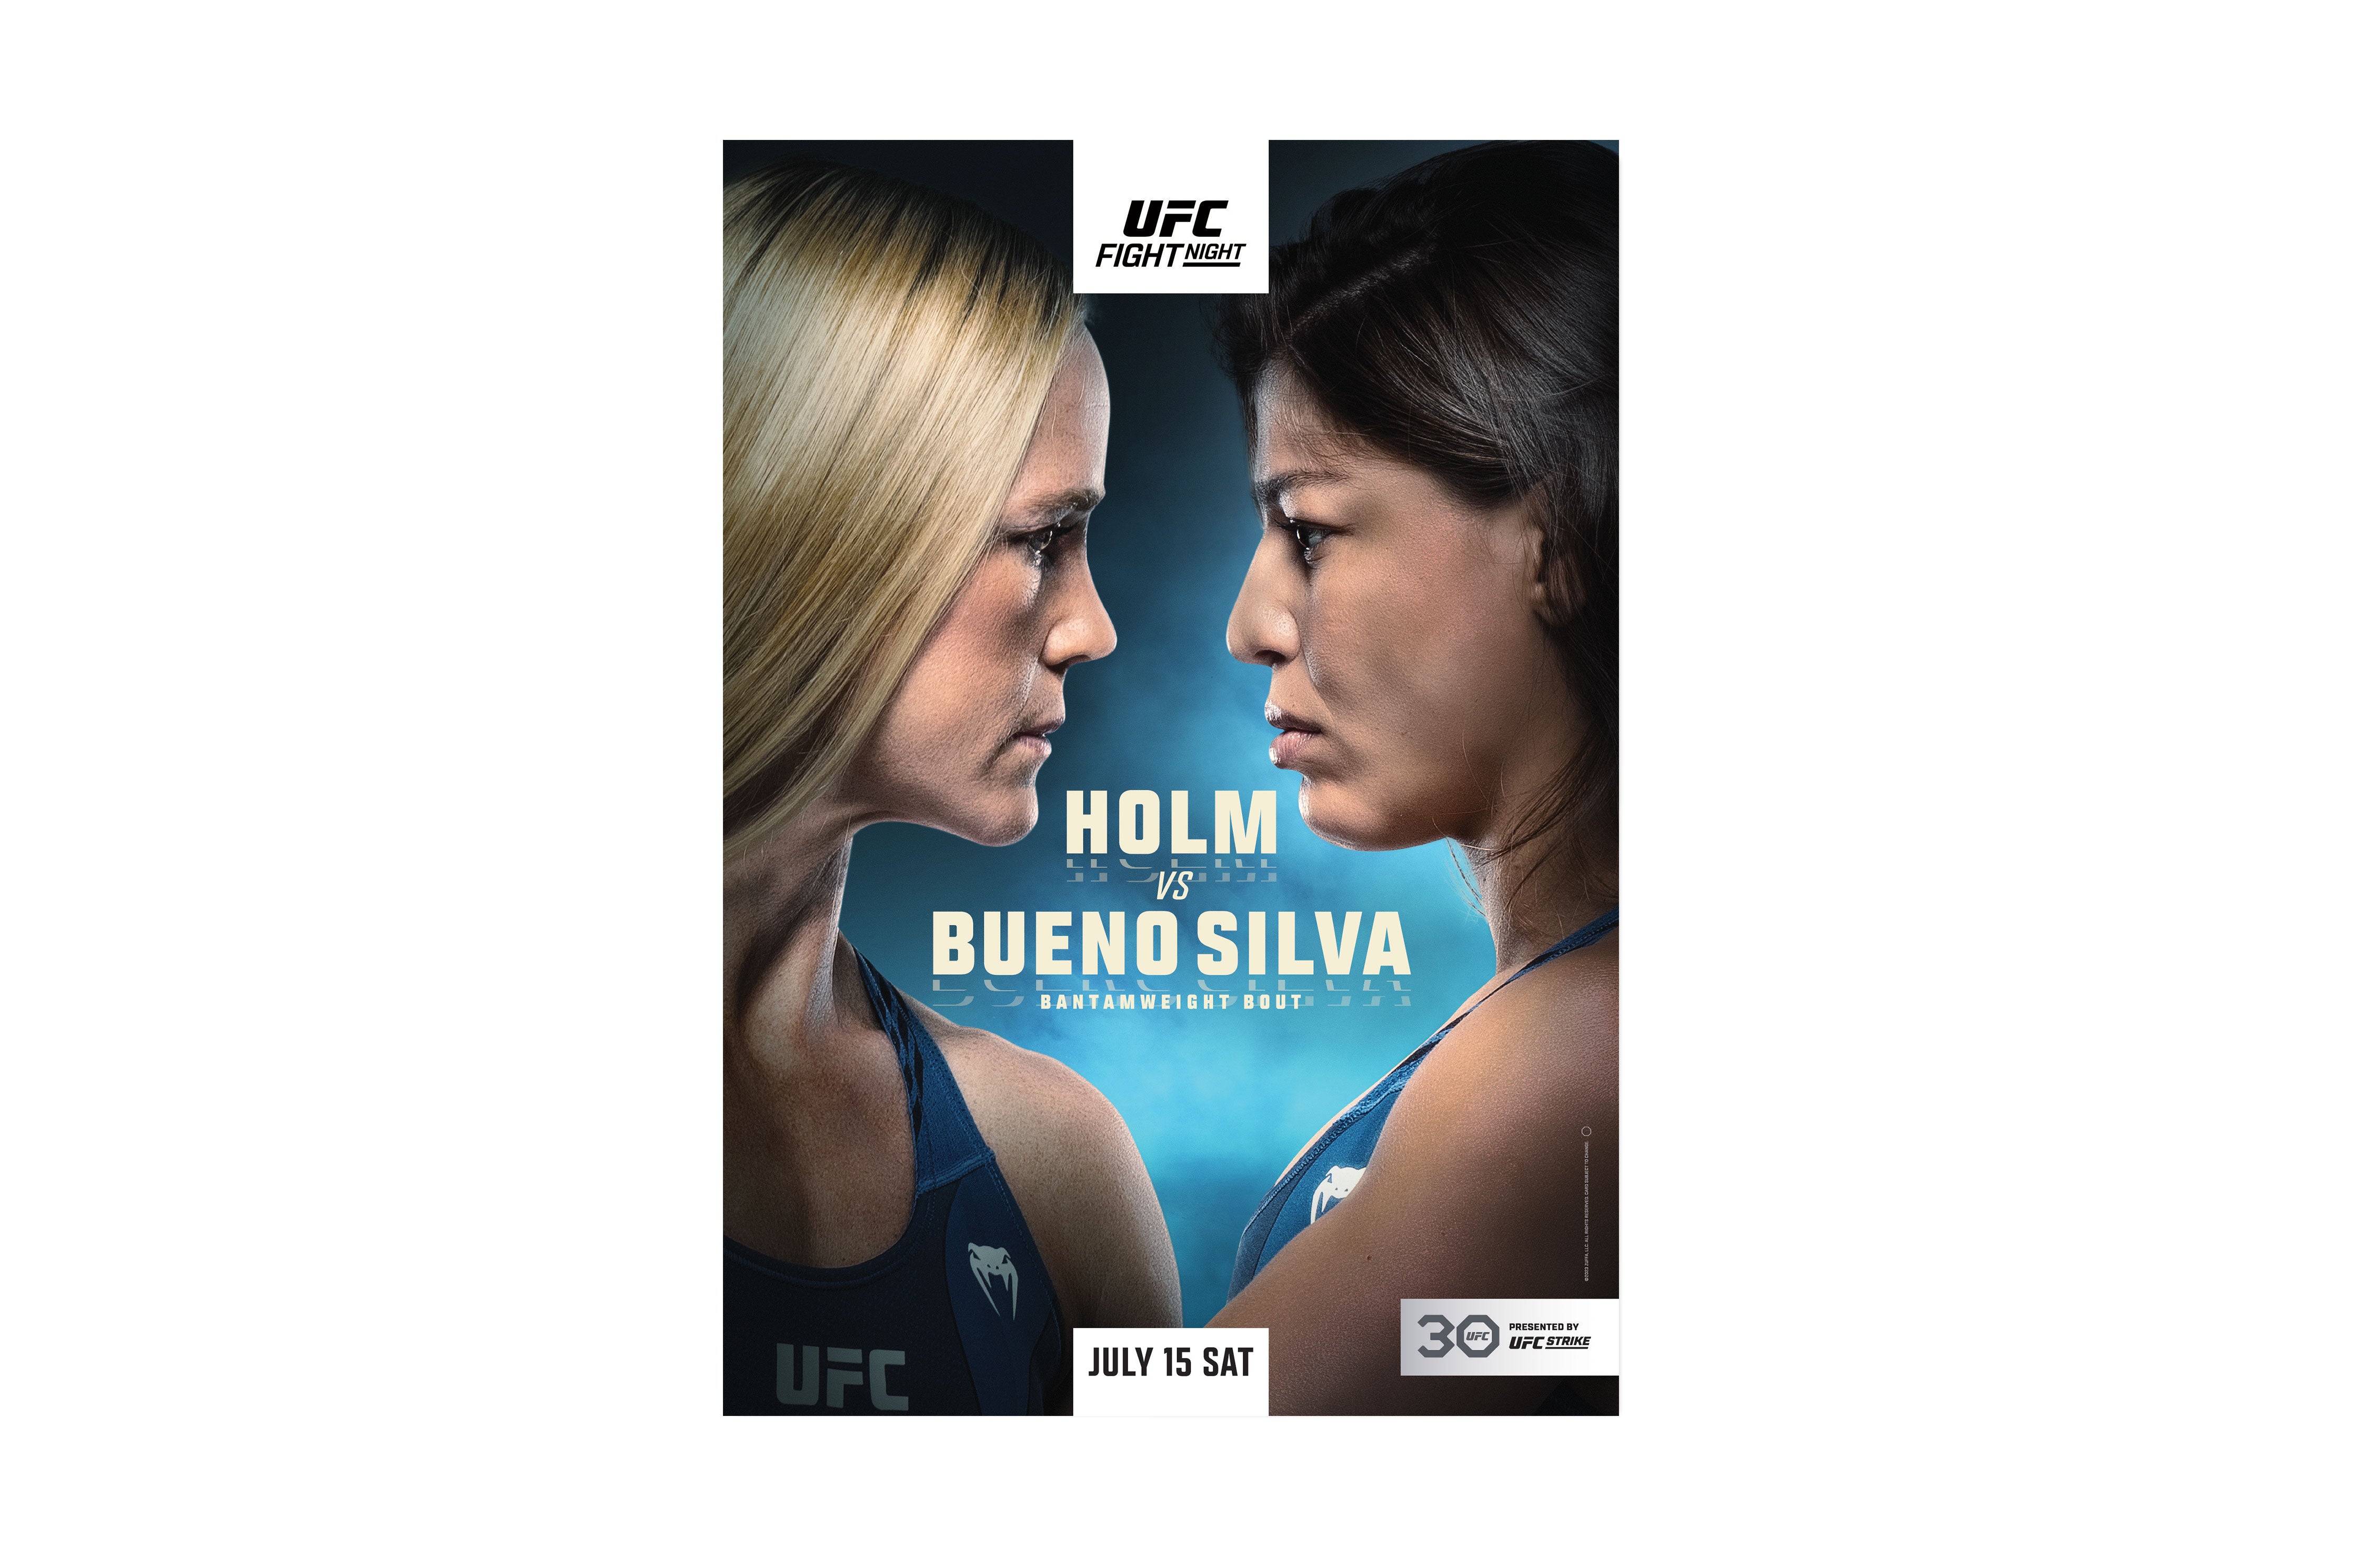 UFC Fight Night: Holm vs Bueno Silva Autographed Event Poster